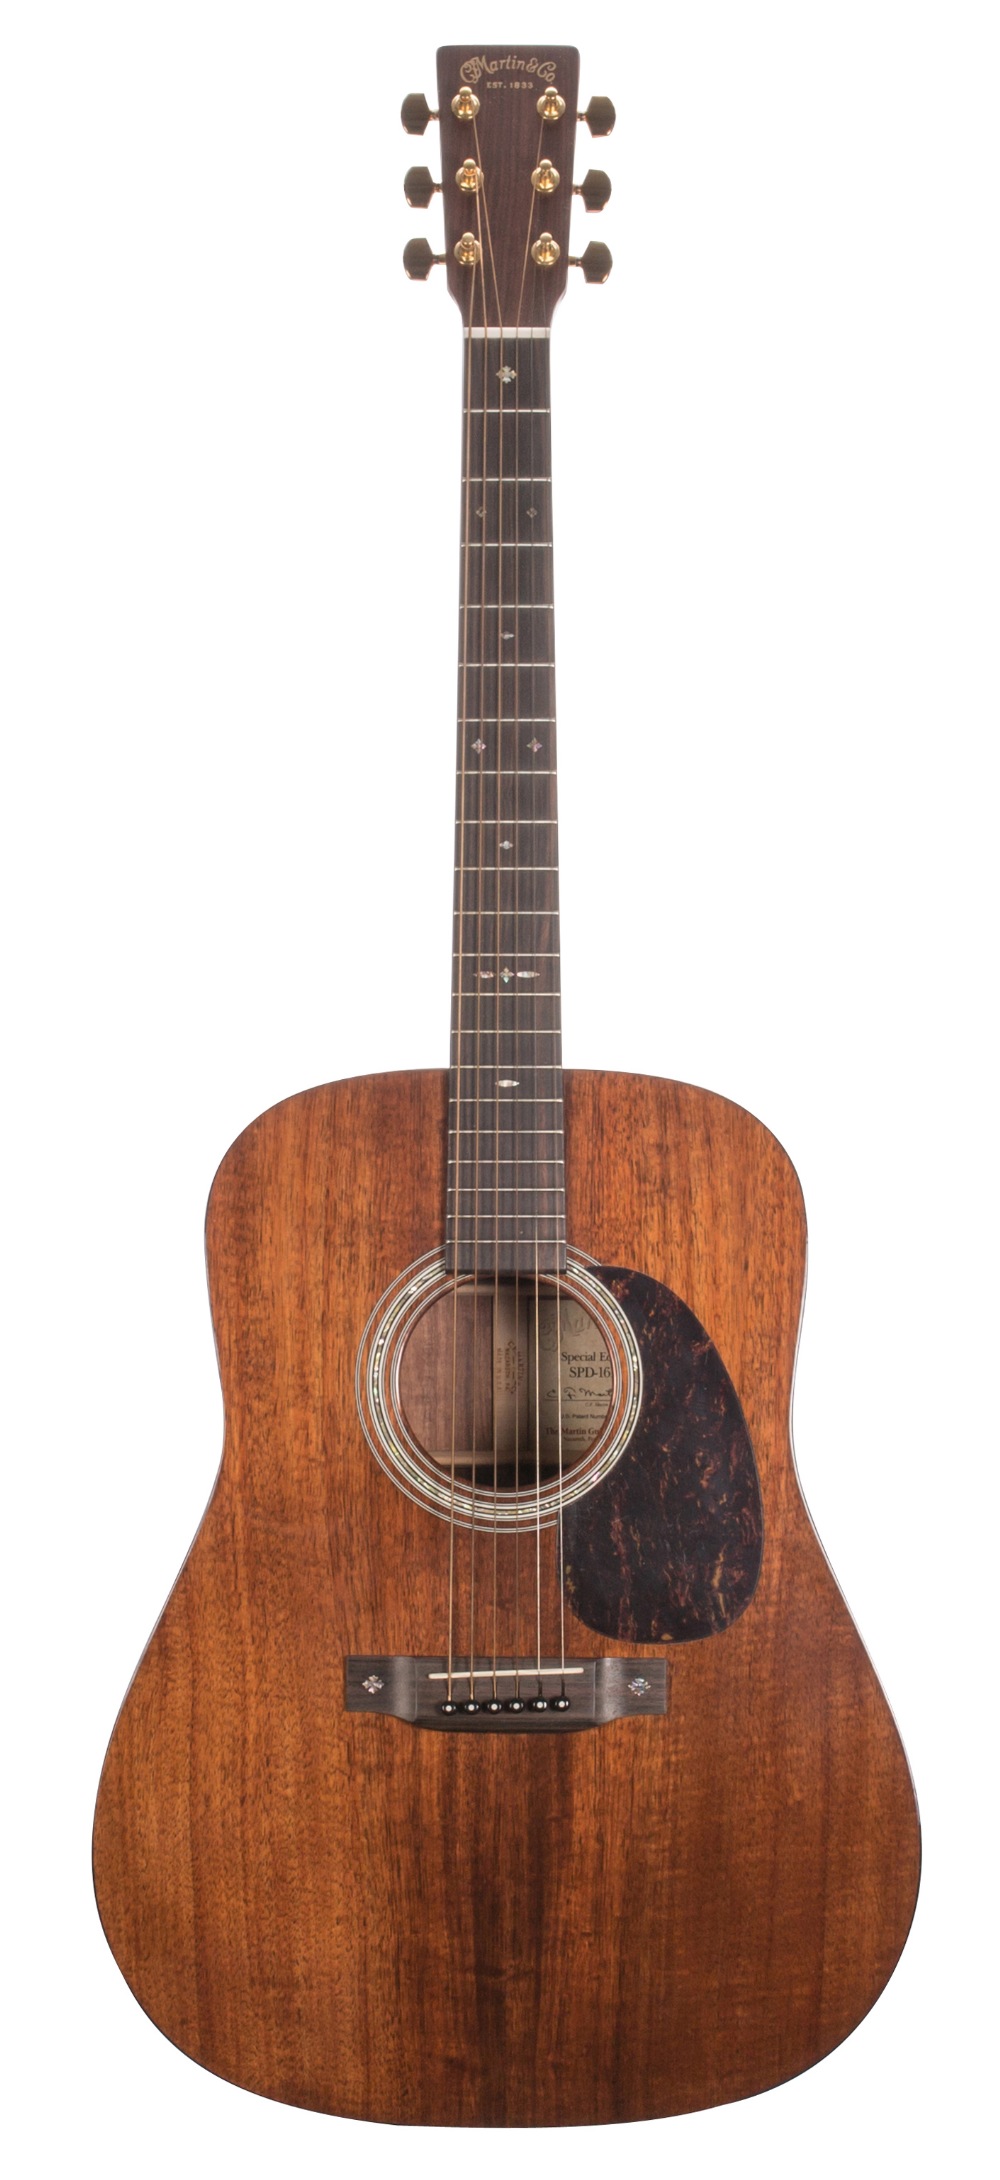 2005 C.F. Martin & Co Special Edition SPD-16K2 acoustic guitar, made in USA, ser. no. 10xxx79; Body: